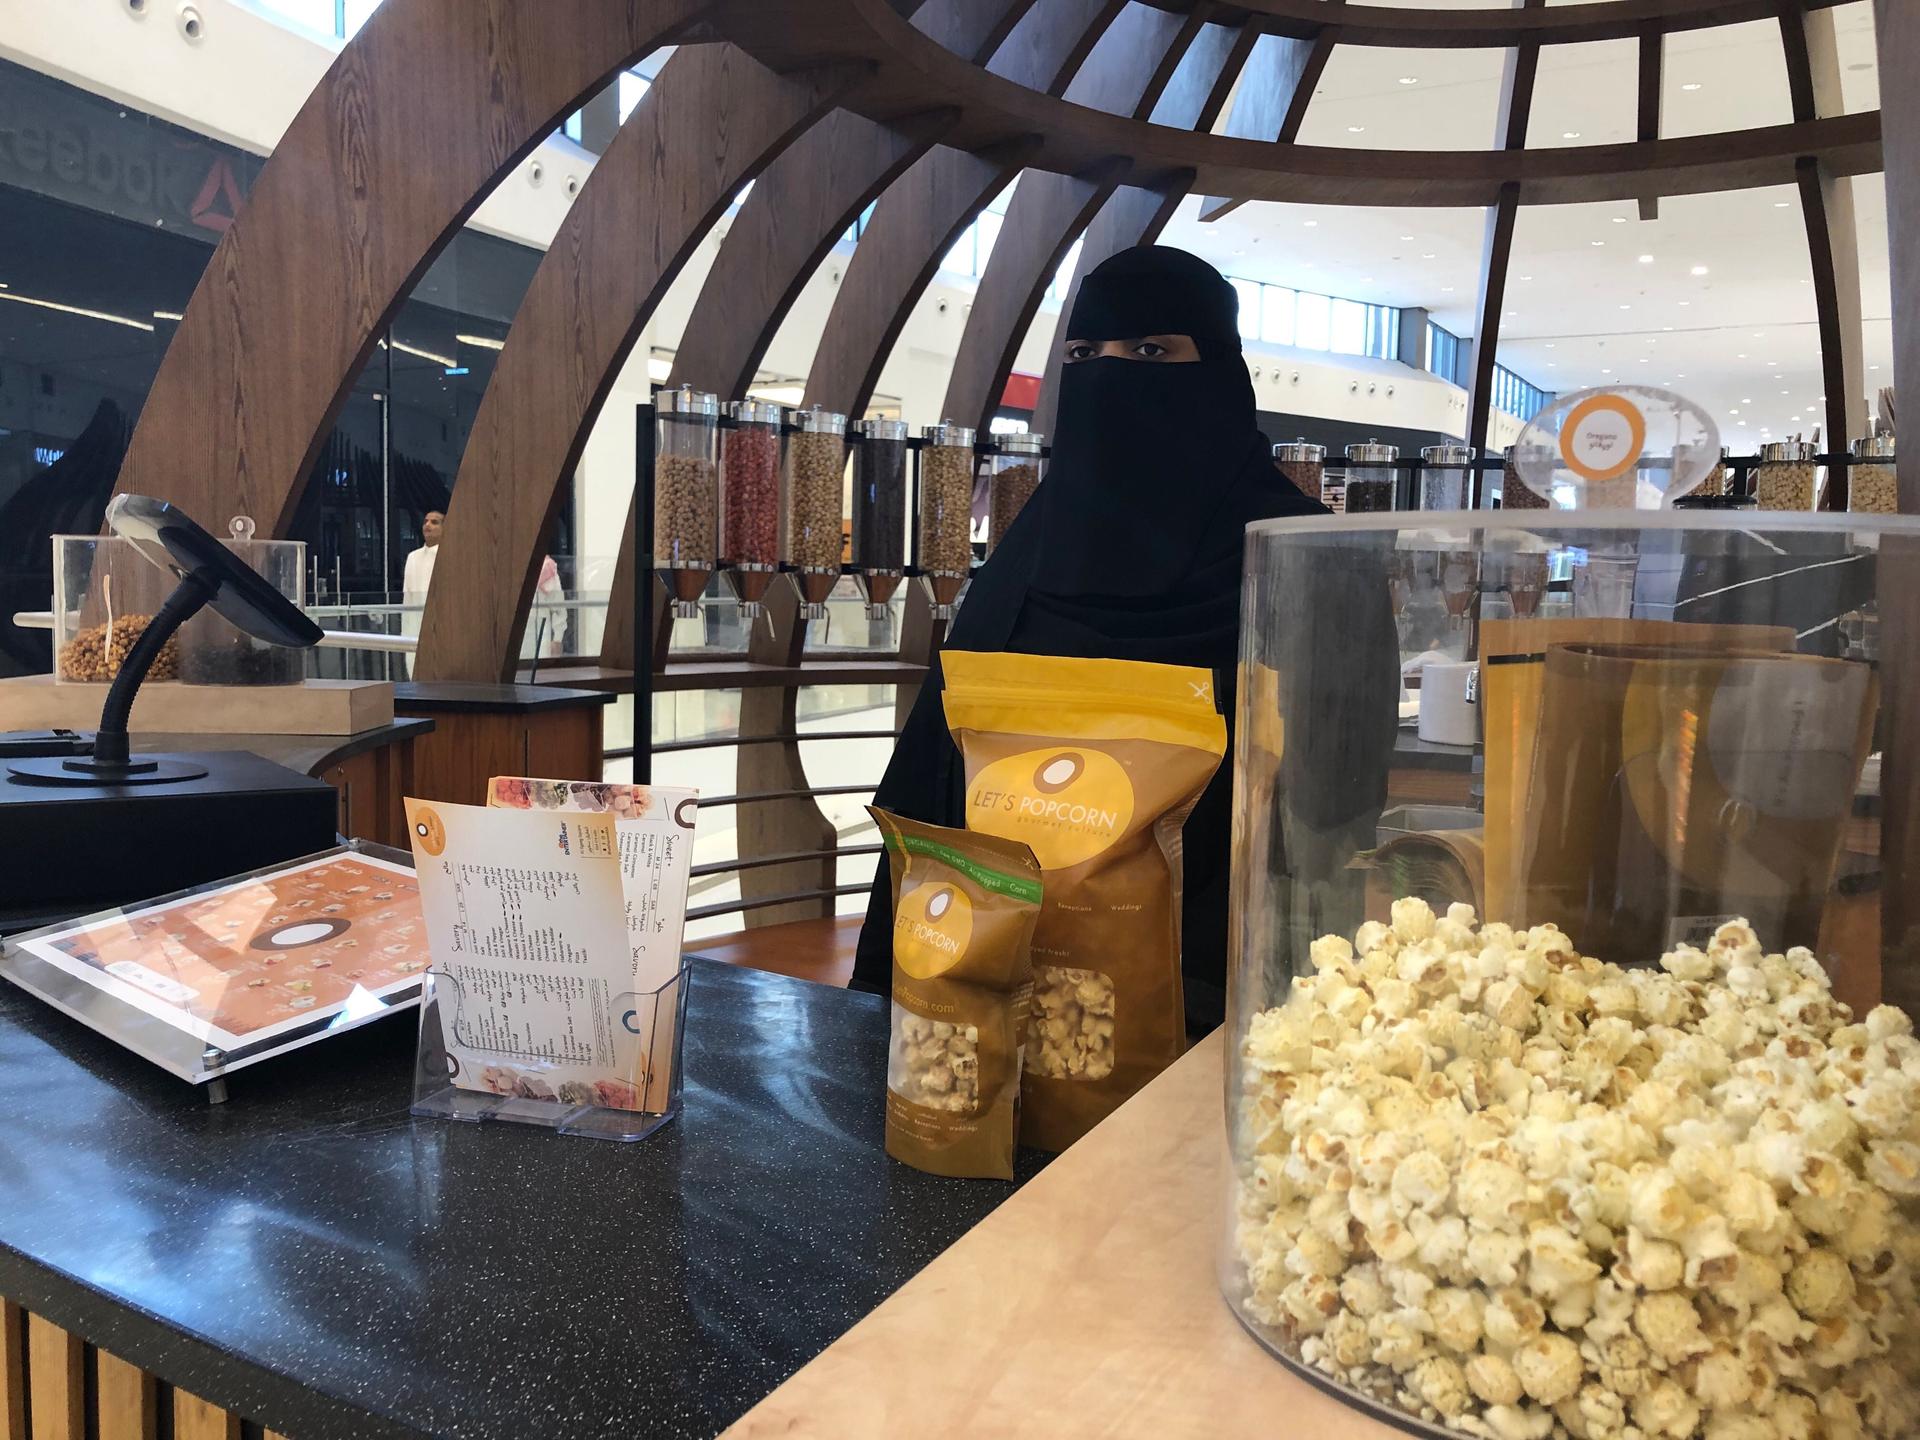 A woman wearing a black veil sells popcorn at a stand at a mall.